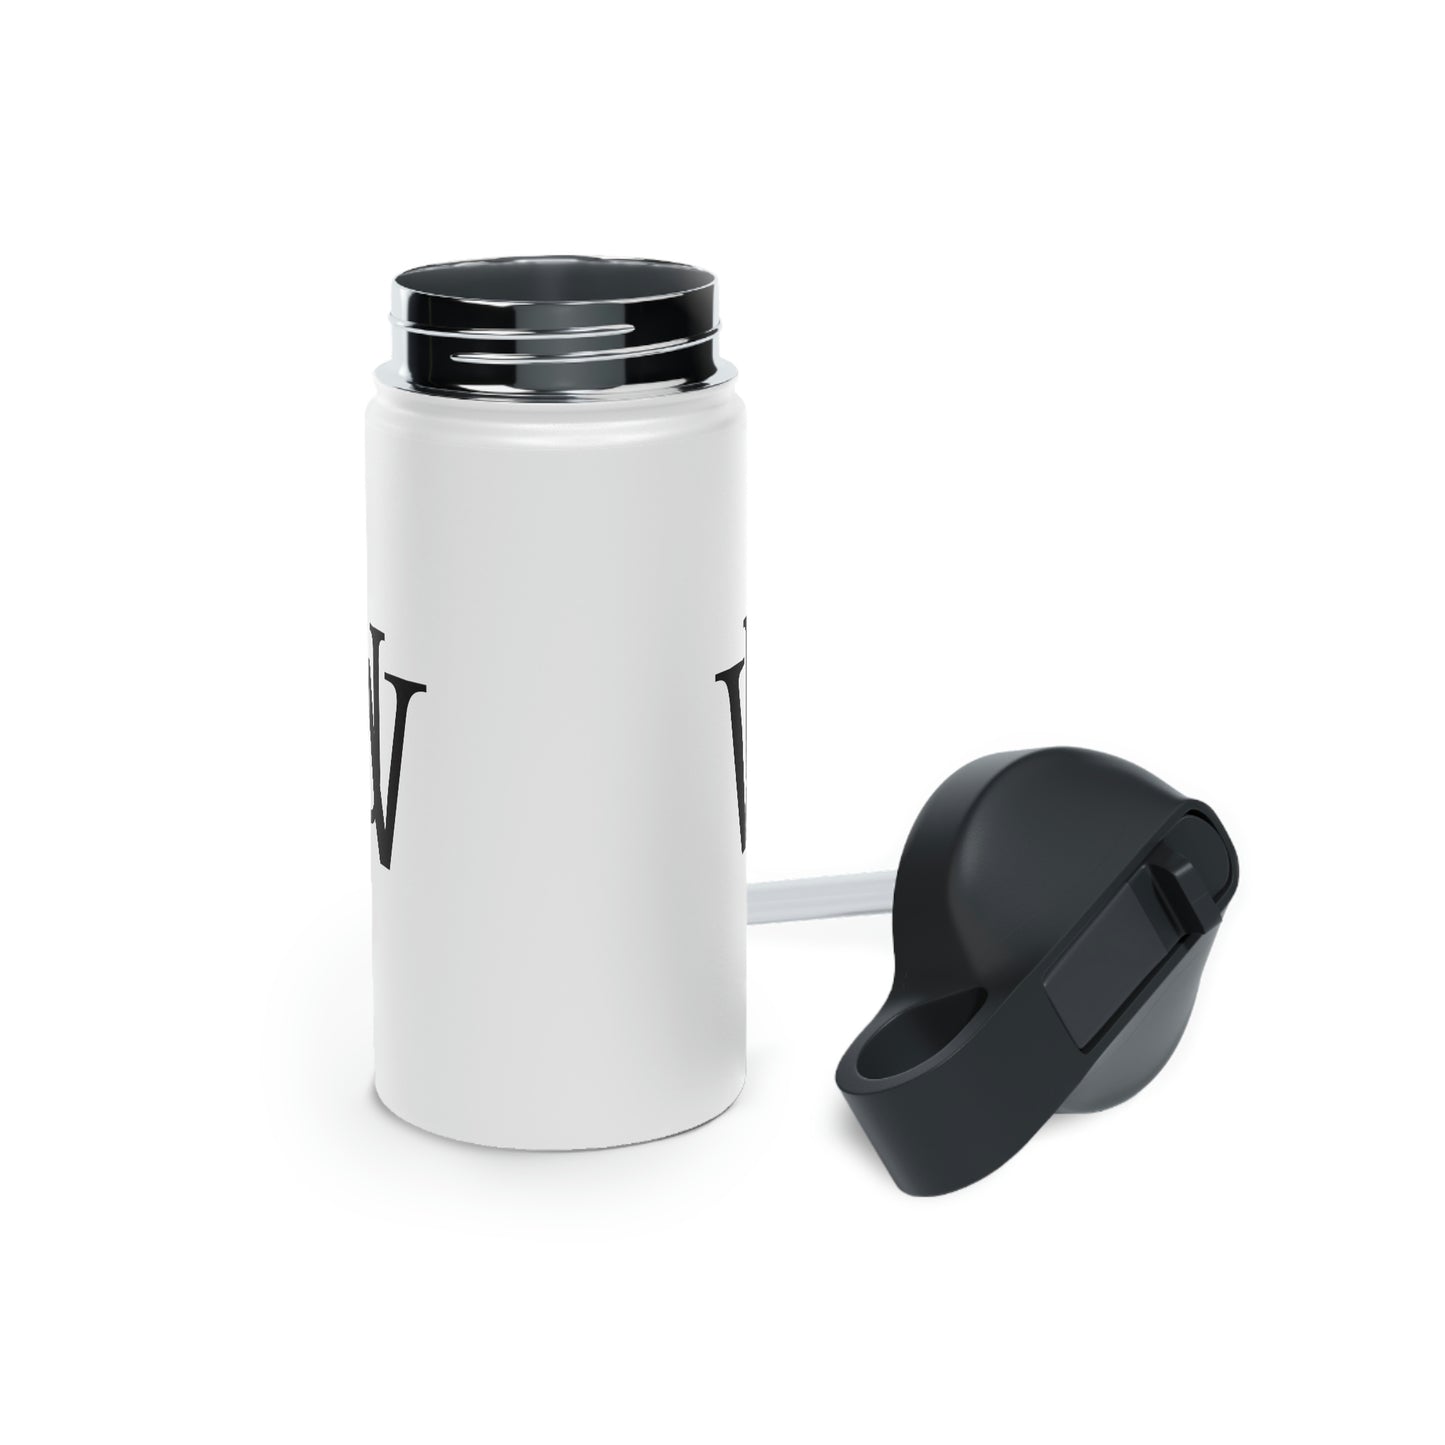 WAKE UP Stainless Steel Water Bottle